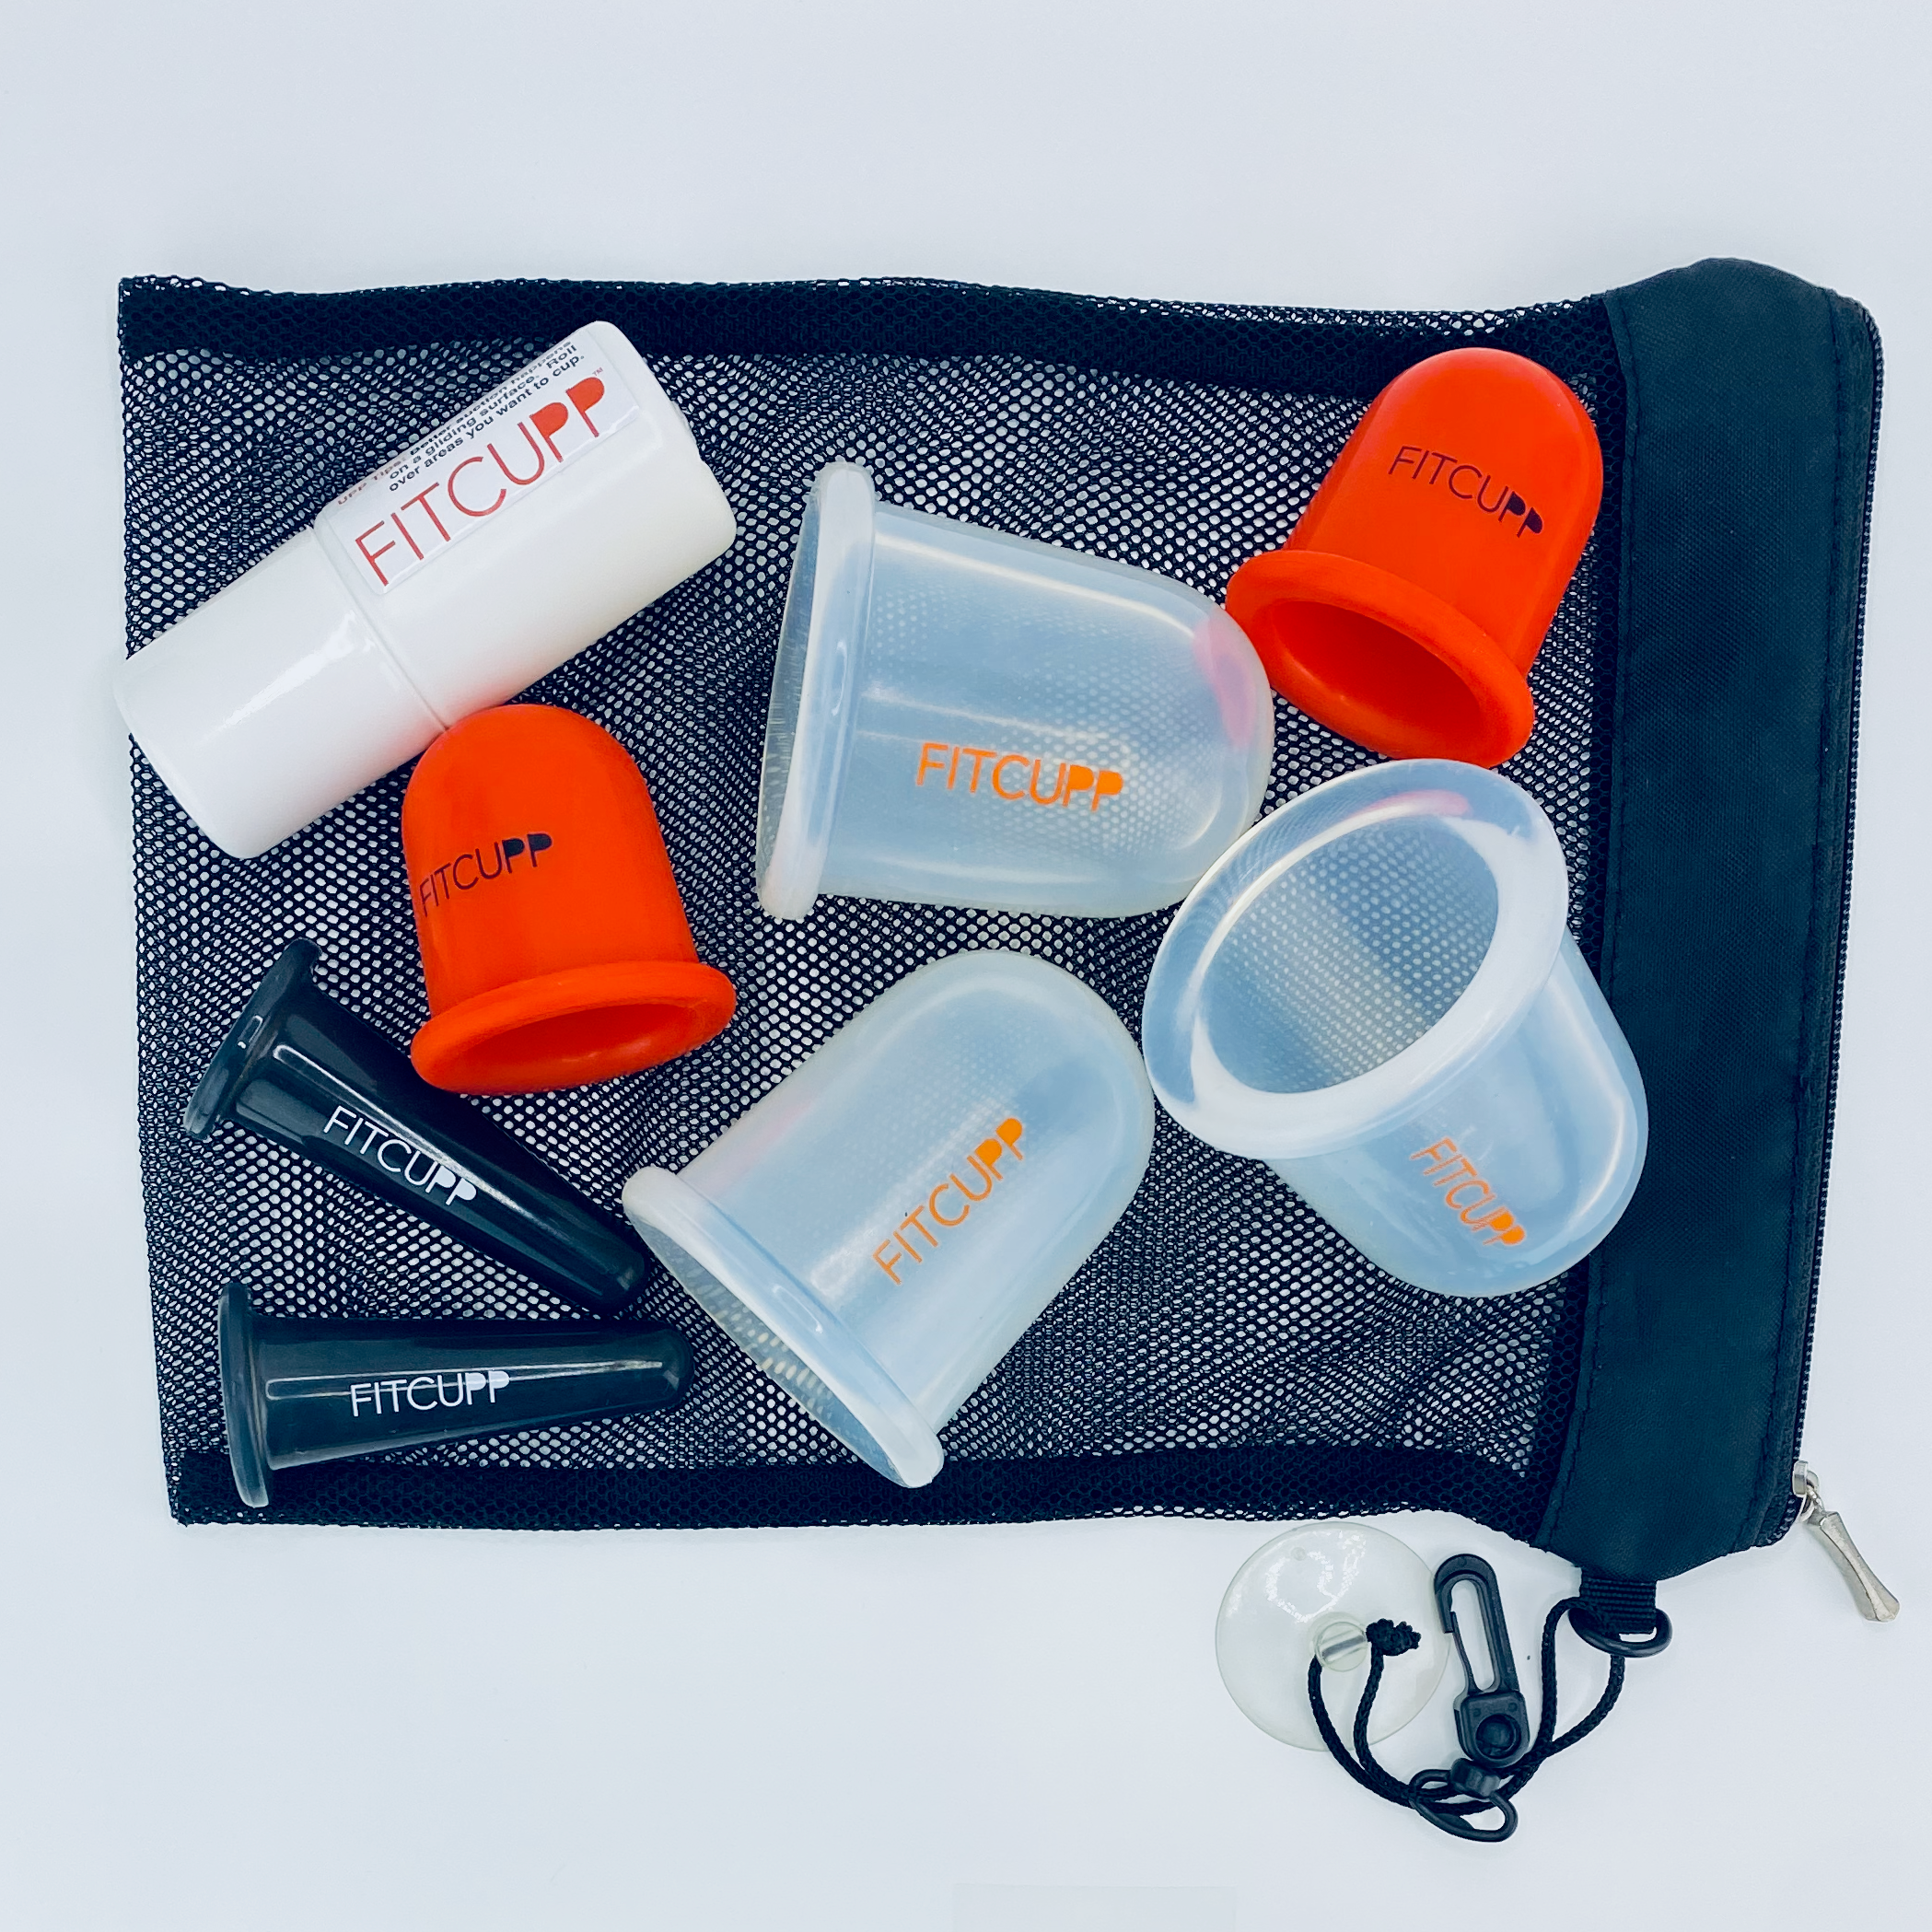 For those who want to make the most of their health and time! Fitcupp® FitKit Pro gives you the power to address multiple areas on the body at the same time! Three large Fitcupp®, two small Fitcupp®, 2 Fitcupp® cone cupps and oil will have you prepped for your workout, on the road to quick recovery, prevent and smooth cellulite and address specific issues such as digestion, breast health, sinus discomfort, wrinkles and headaches! 